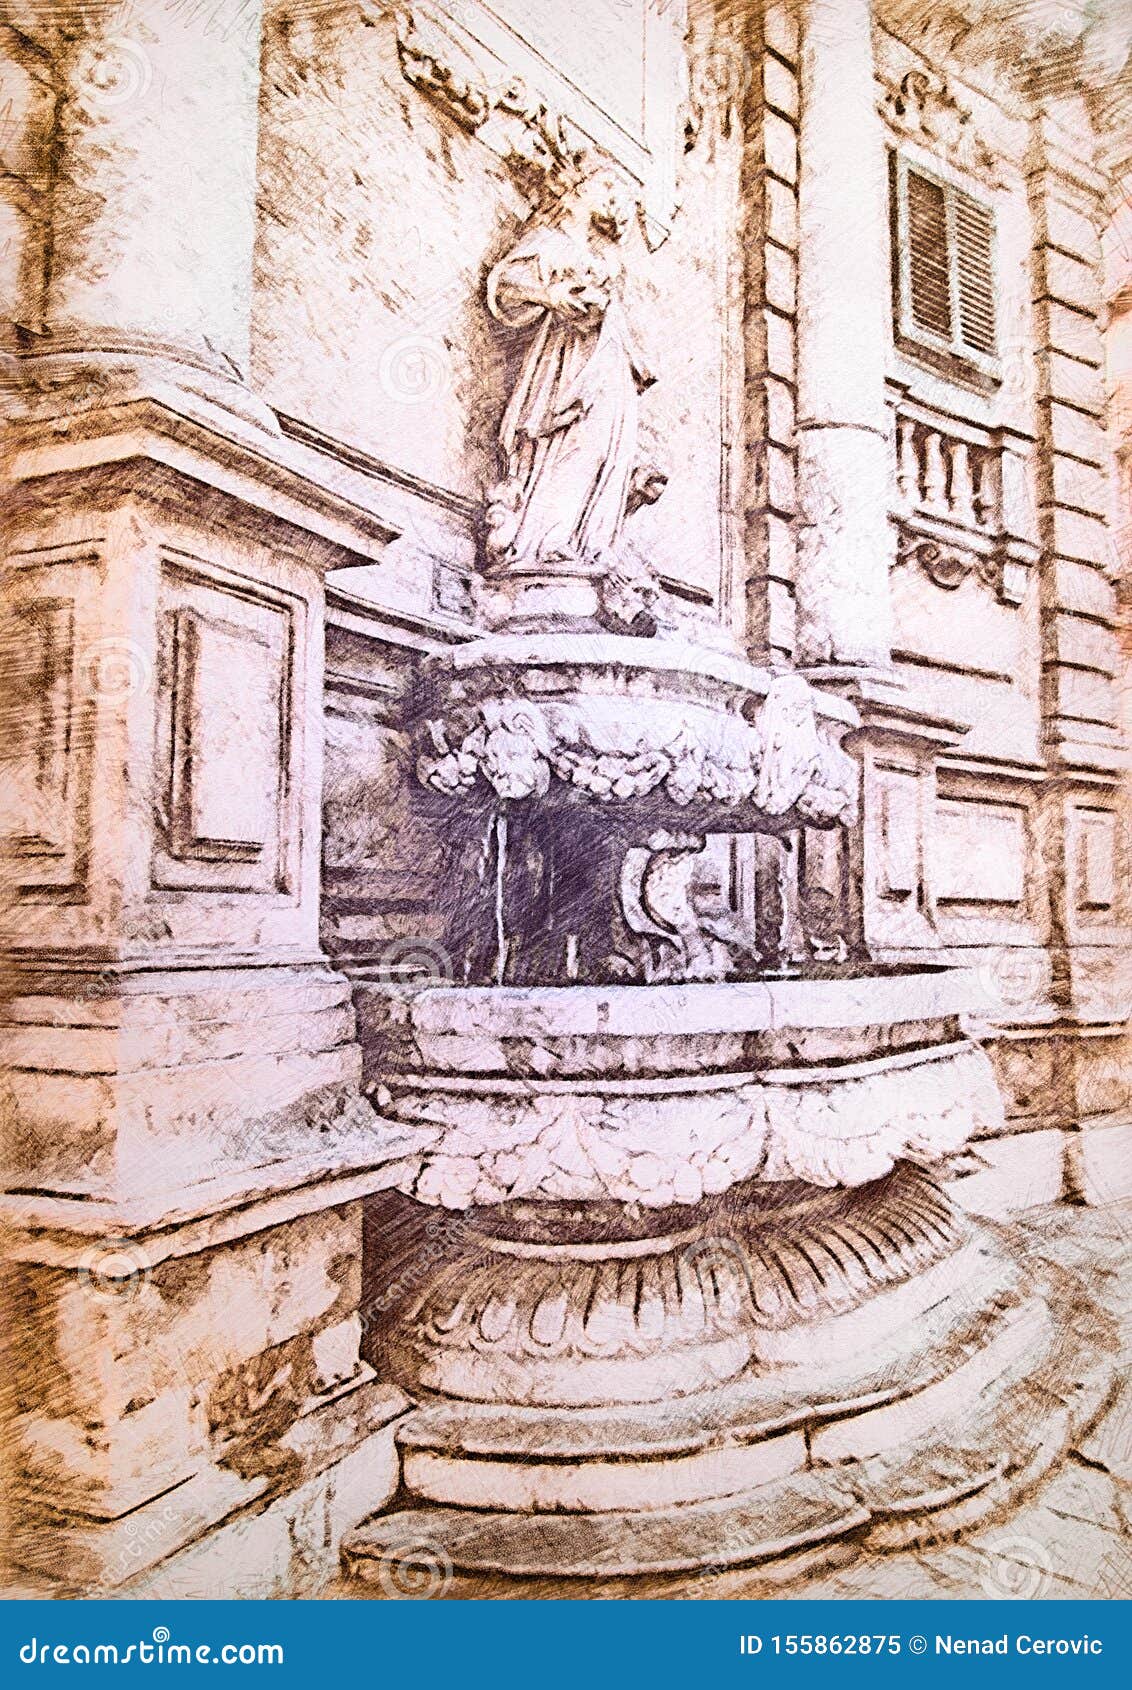 fontain from quattro canti in palermo sicily. color pencil sketch painting artwork. italy, sicilia.